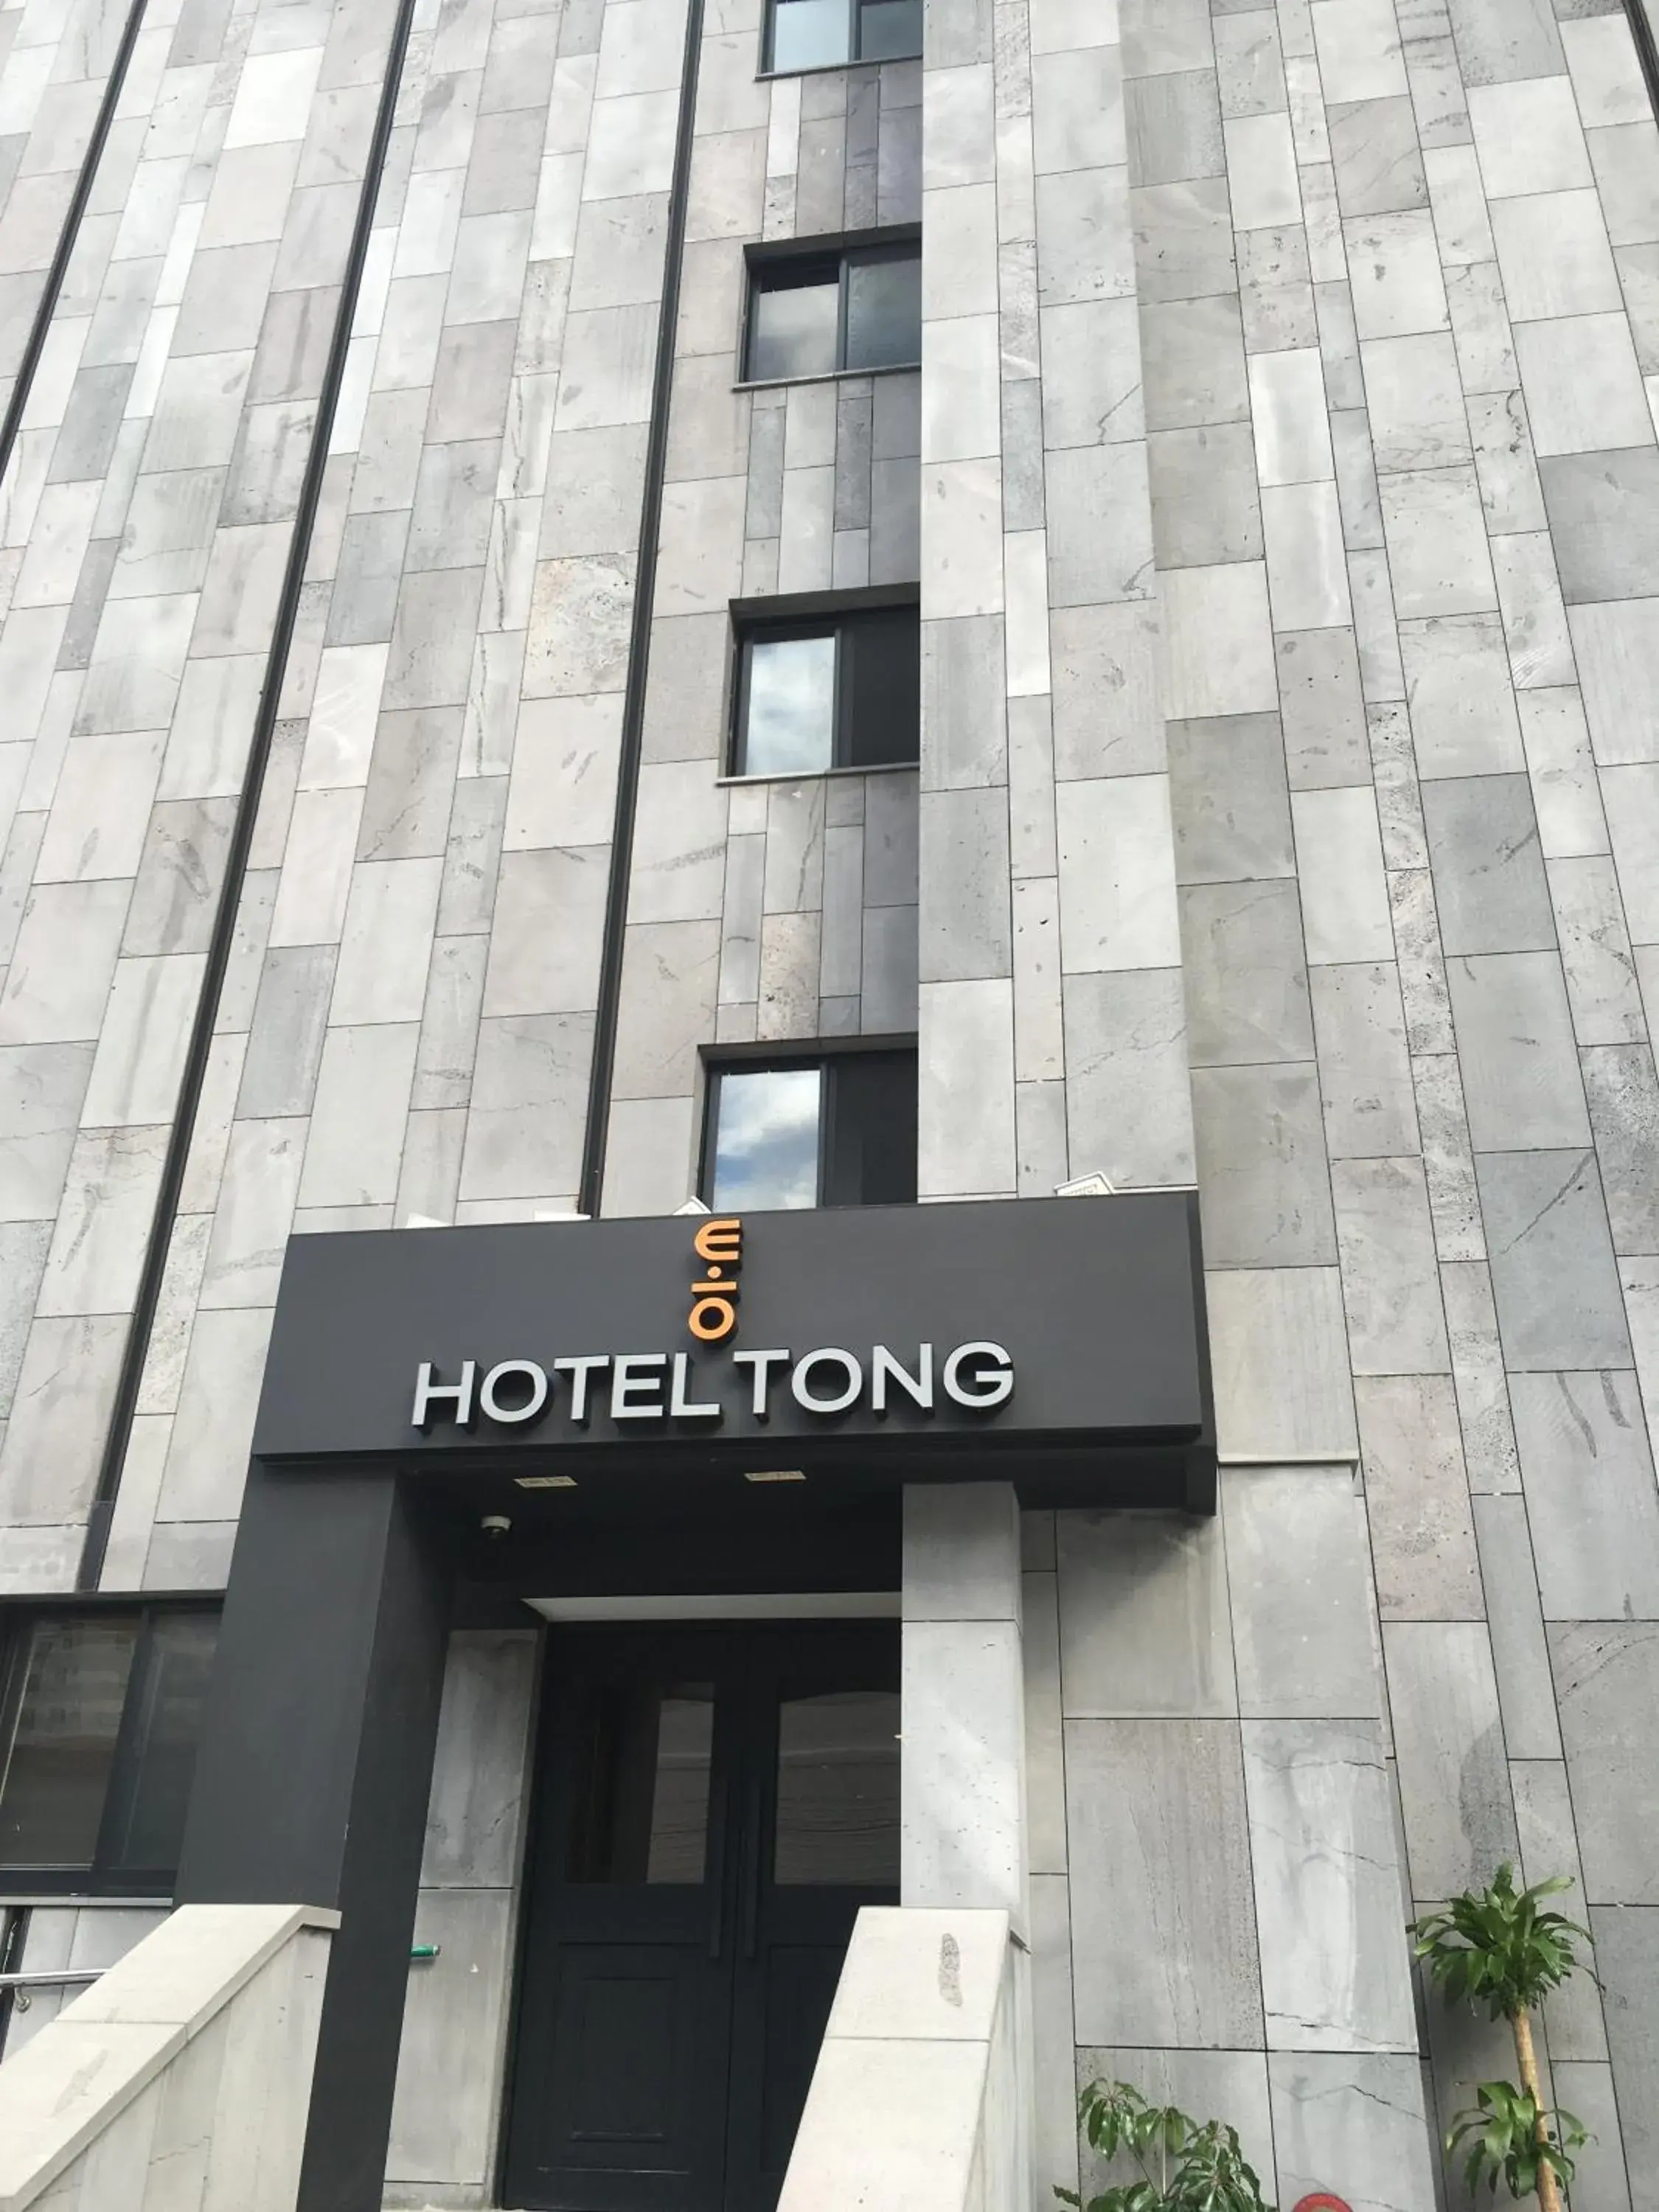 Property Building in Hotel Tong Yeondong Jeju